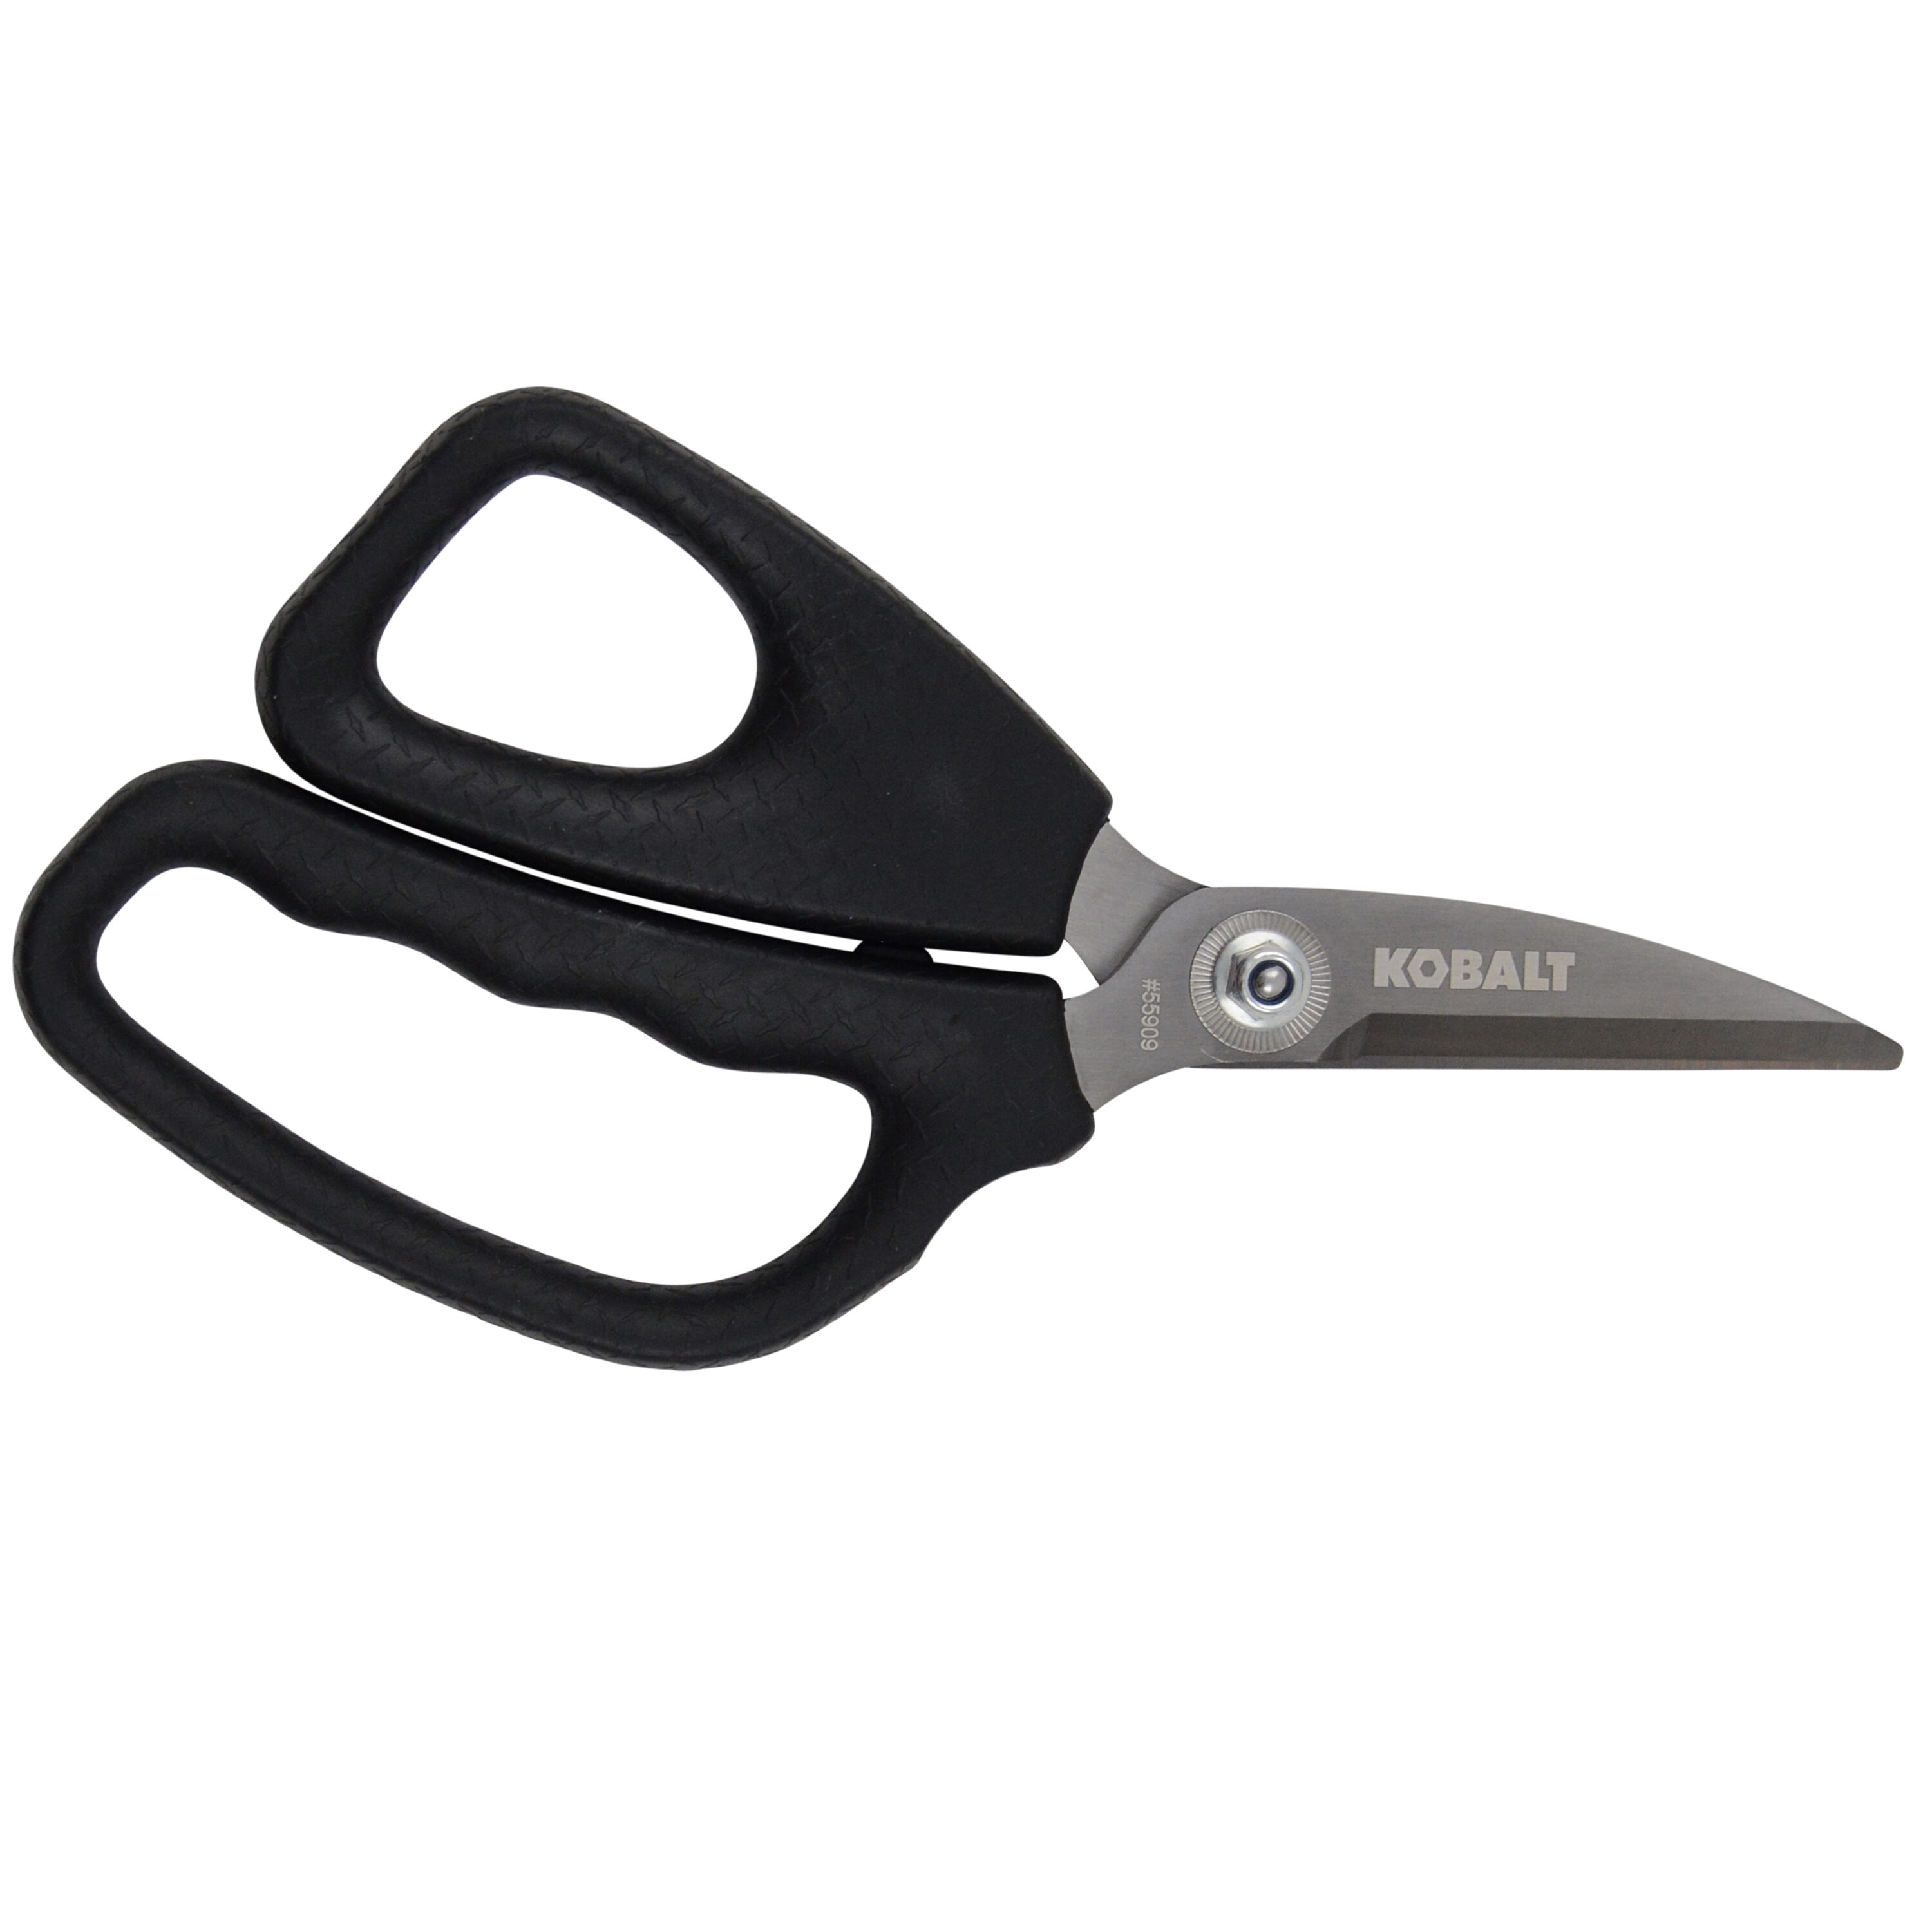 Stalwart Cordless Power Scissors with Two Blades - Fabric, Leather, Carpet and Cardboard